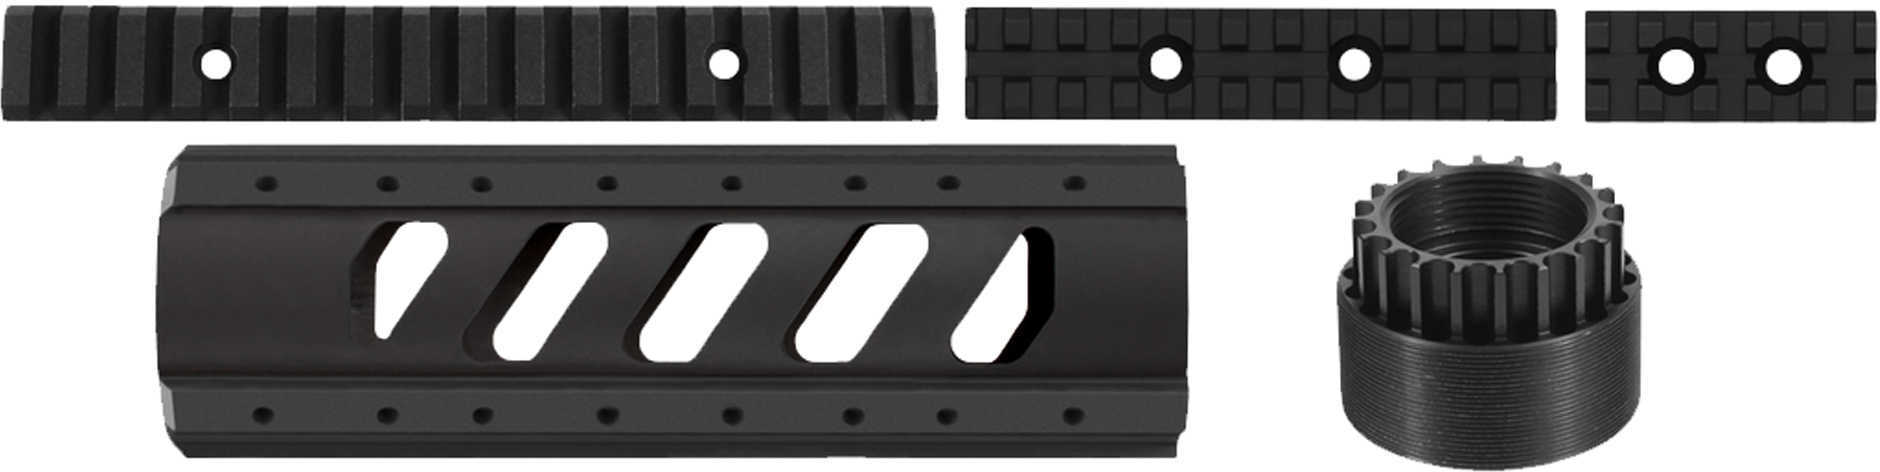 Advanced Technology Intl. AR-15 Aluminum 6-Side Carbine Length Free Float Forend w/Rail Pack Md: A.5.10.1171